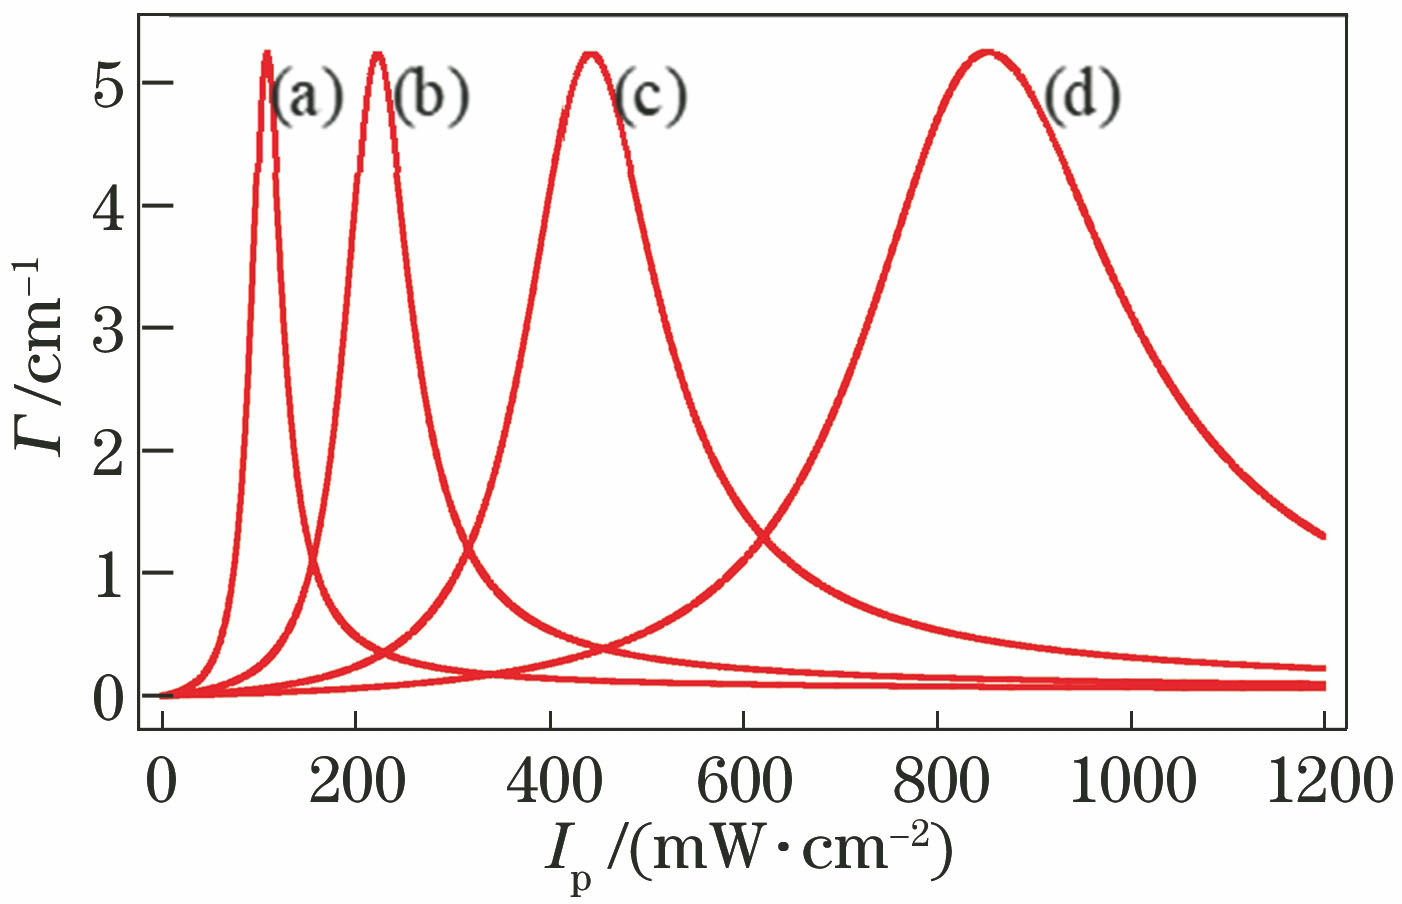 Theoretical curves of gain coefficient varying with pump intensity at different temperatures when θ=5° and E0=5 kV·cm-1. (a) 290 K; (b) 298 K; (c) 306 K; (d) 314 K